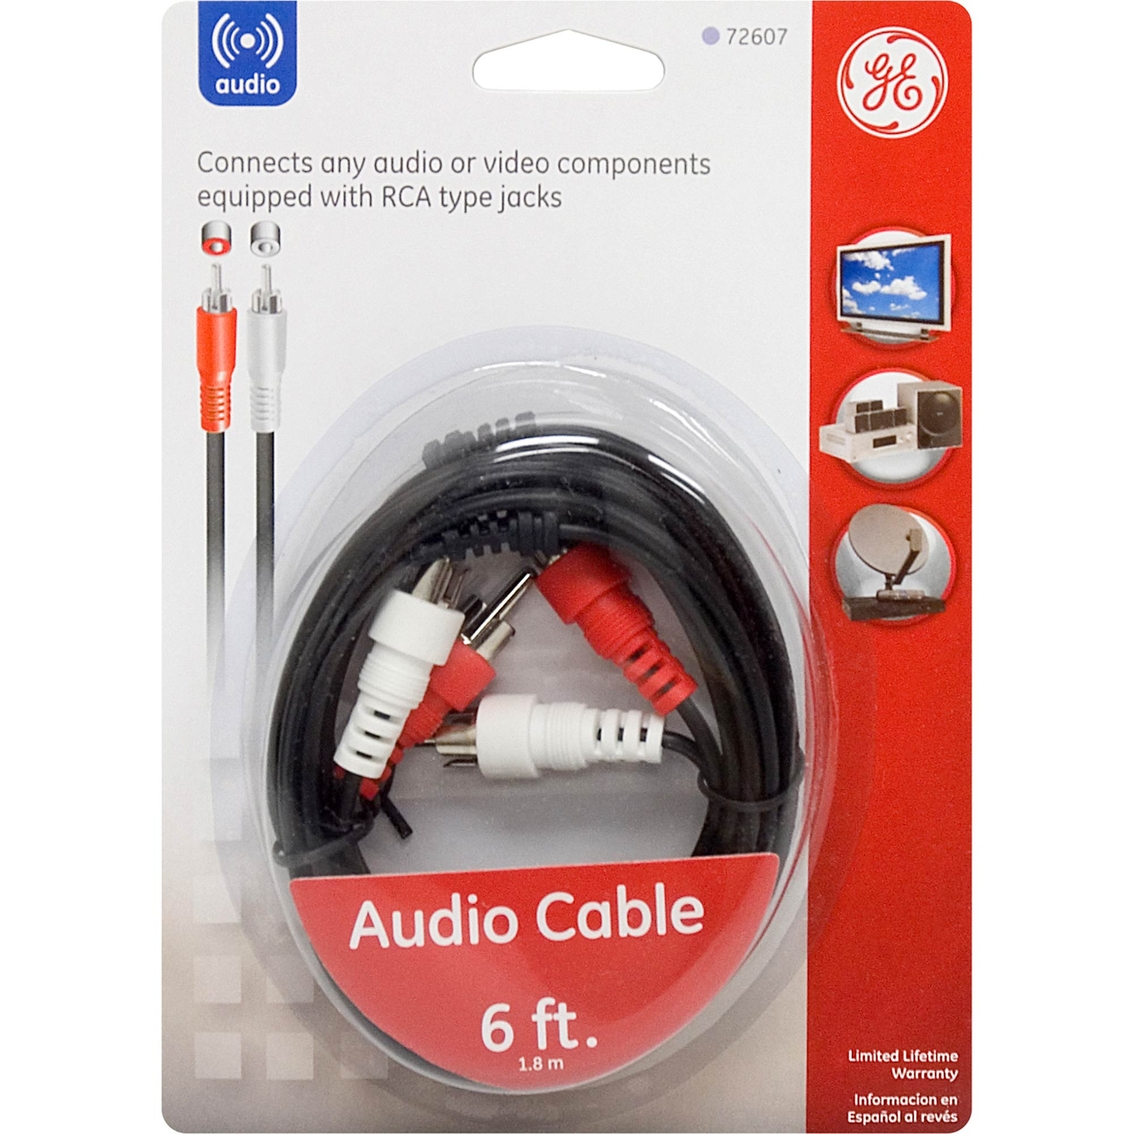 GE 6 ft. RCA Audio Cable - Image 2 of 2